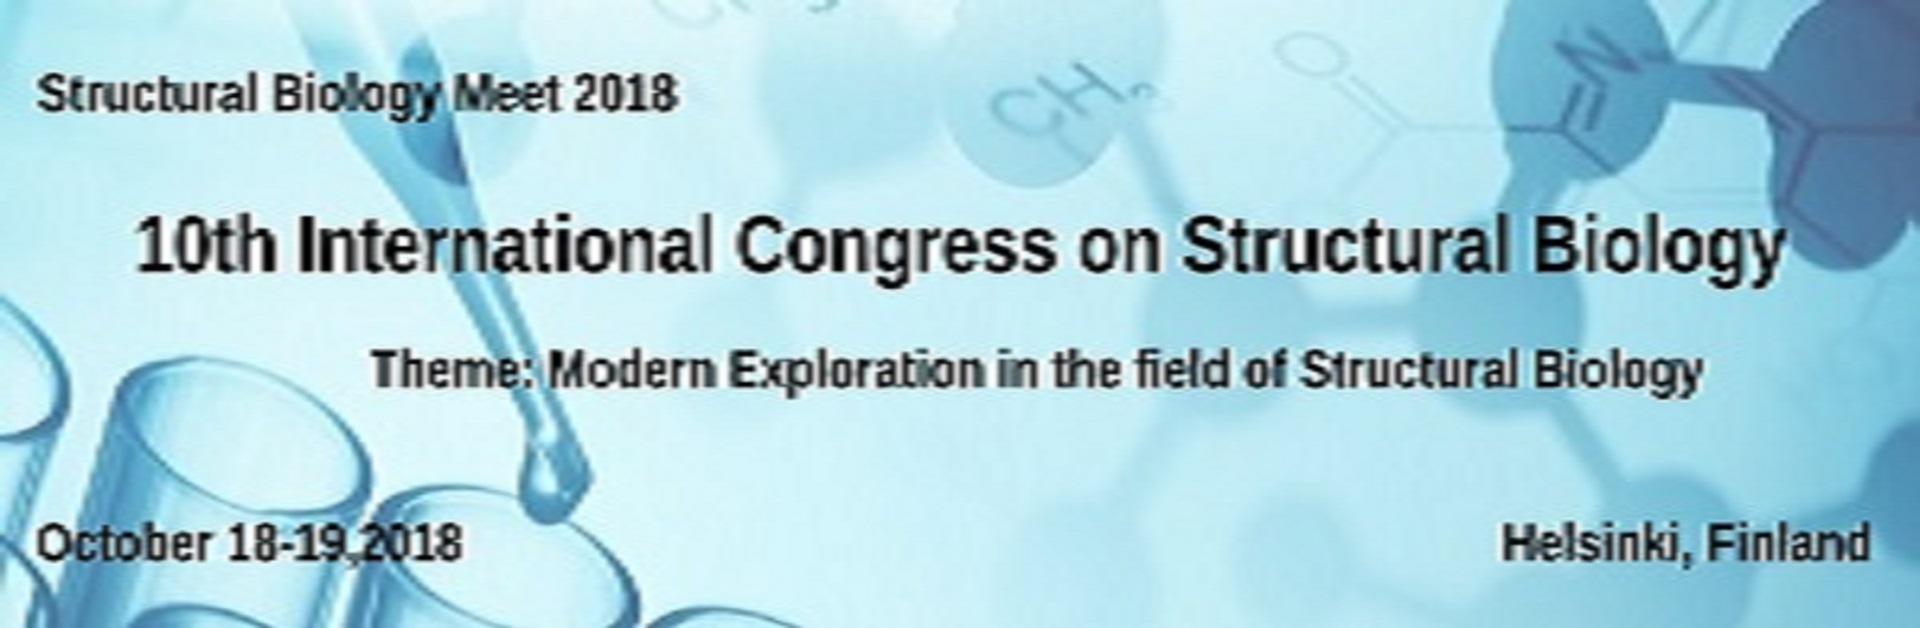 Photos of 10th International Congress on Structural Biology